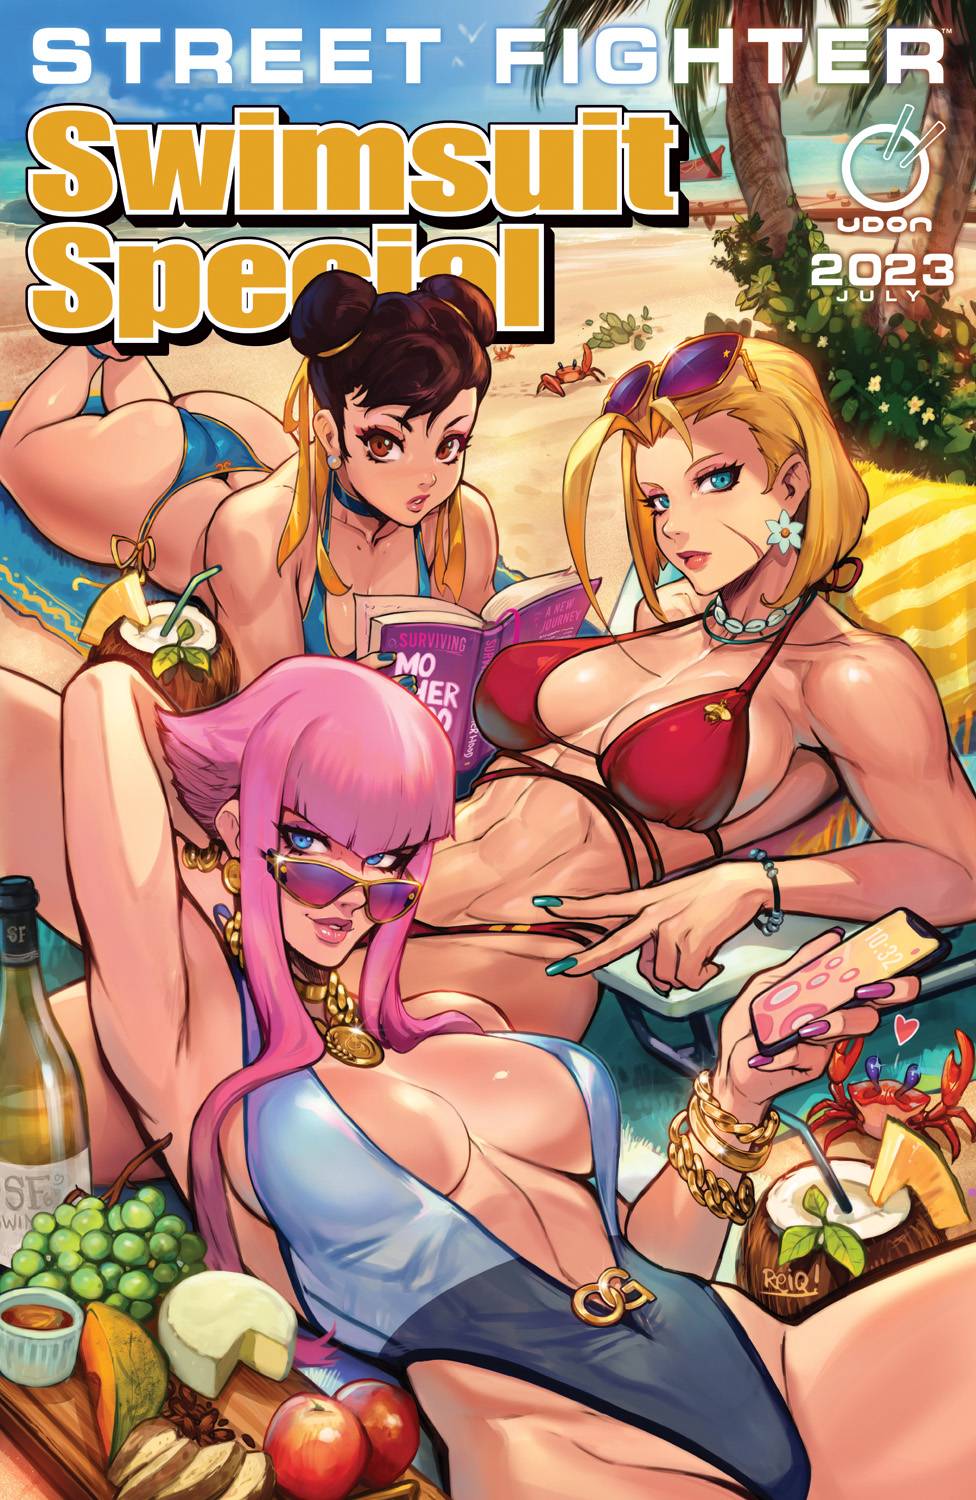 Street fighter swimsuit special 2023 pdf